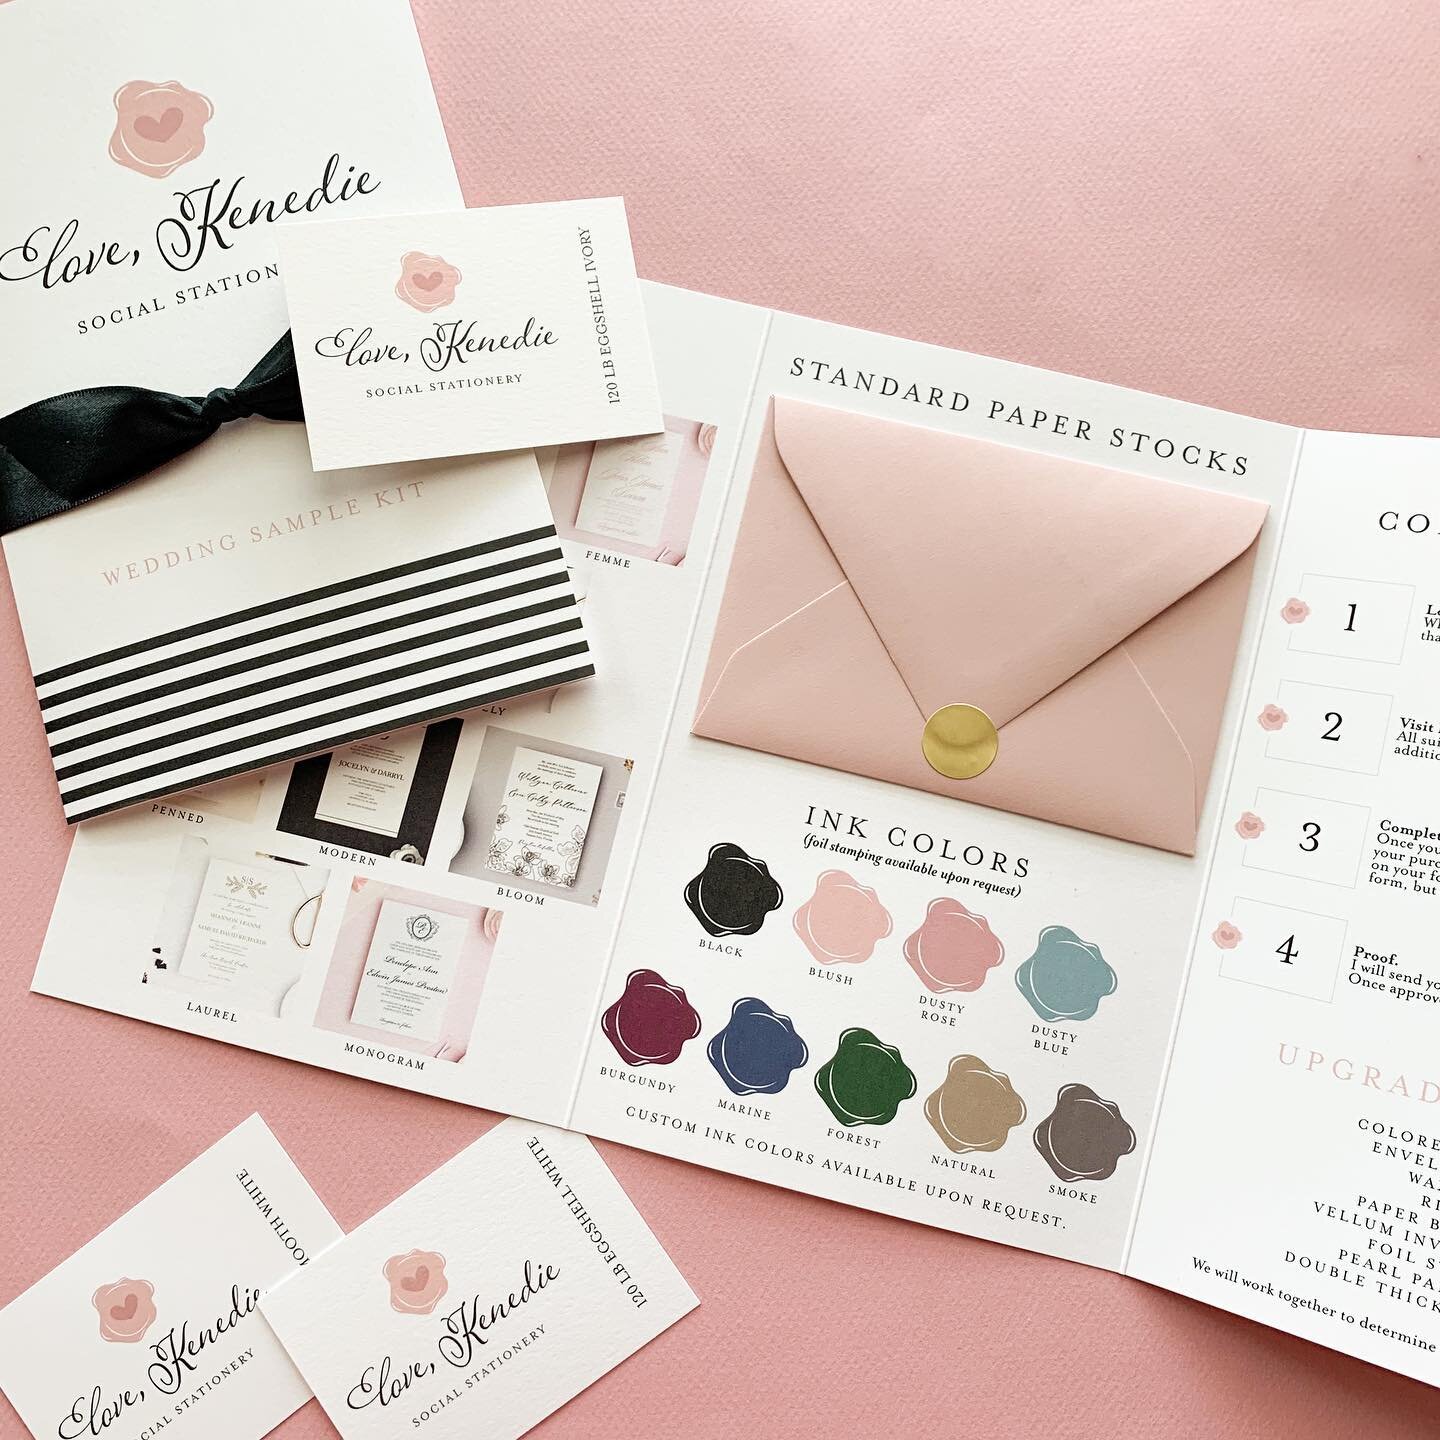 You can order a sample kit to see my standard paper stocks and print methods. Visit lovekenedie.com to order yours! If you have a 2022 event upcoming, now is the time to book. I would love to work with you! 🖤 #lovekenedie #samplekits #weddingcollect